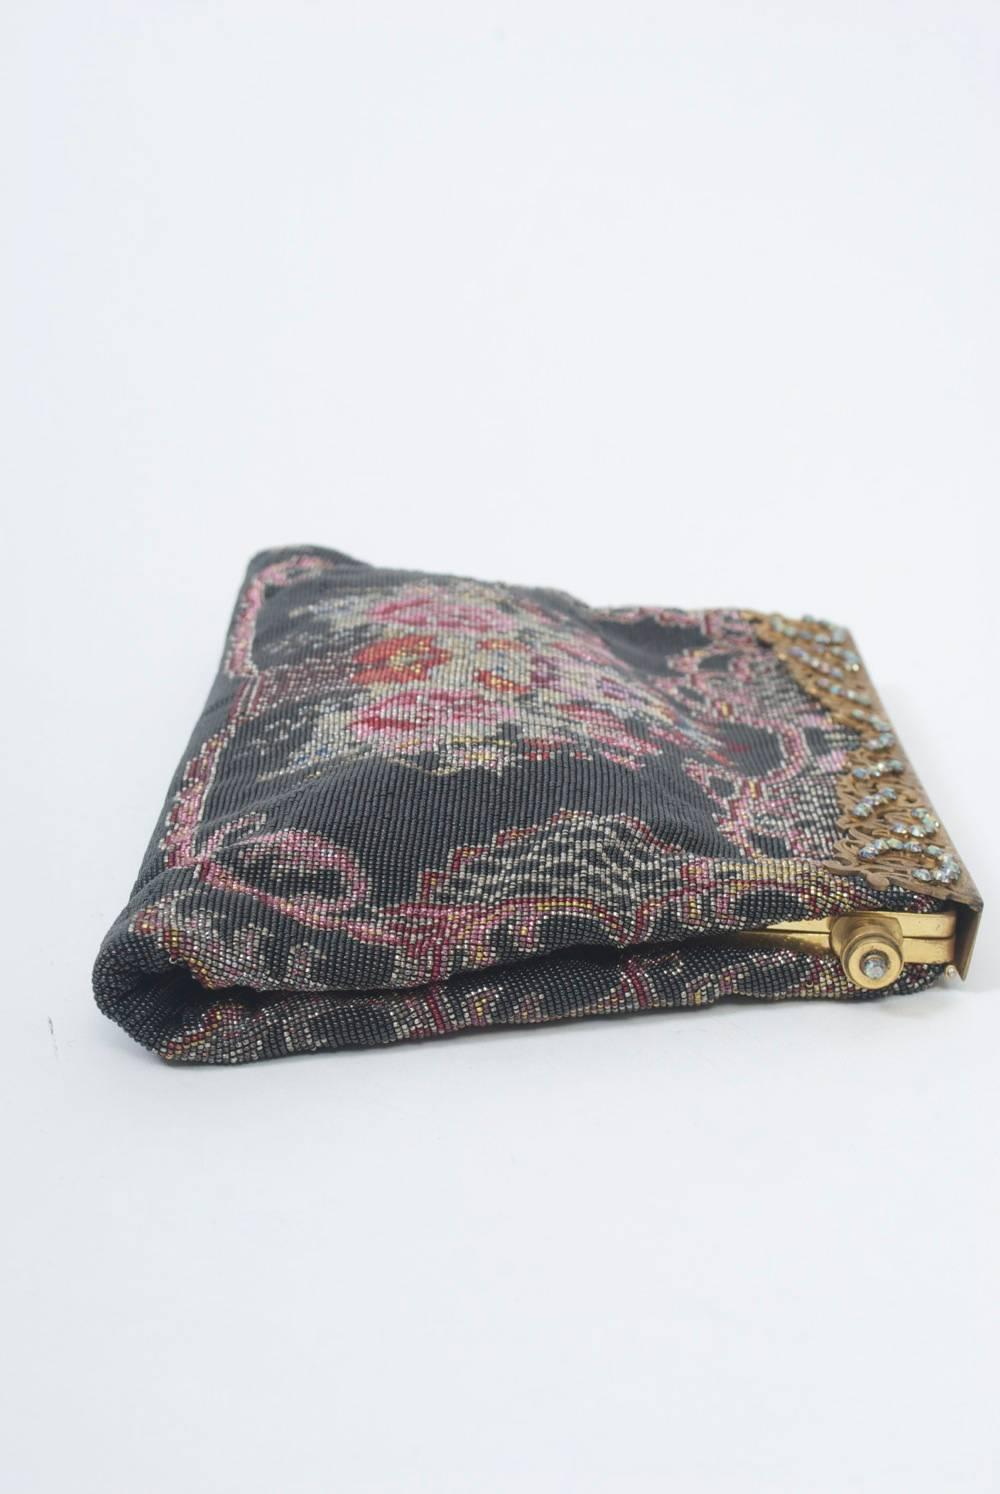 Floral Microbeaded Evening Bag In Excellent Condition For Sale In Alford, MA